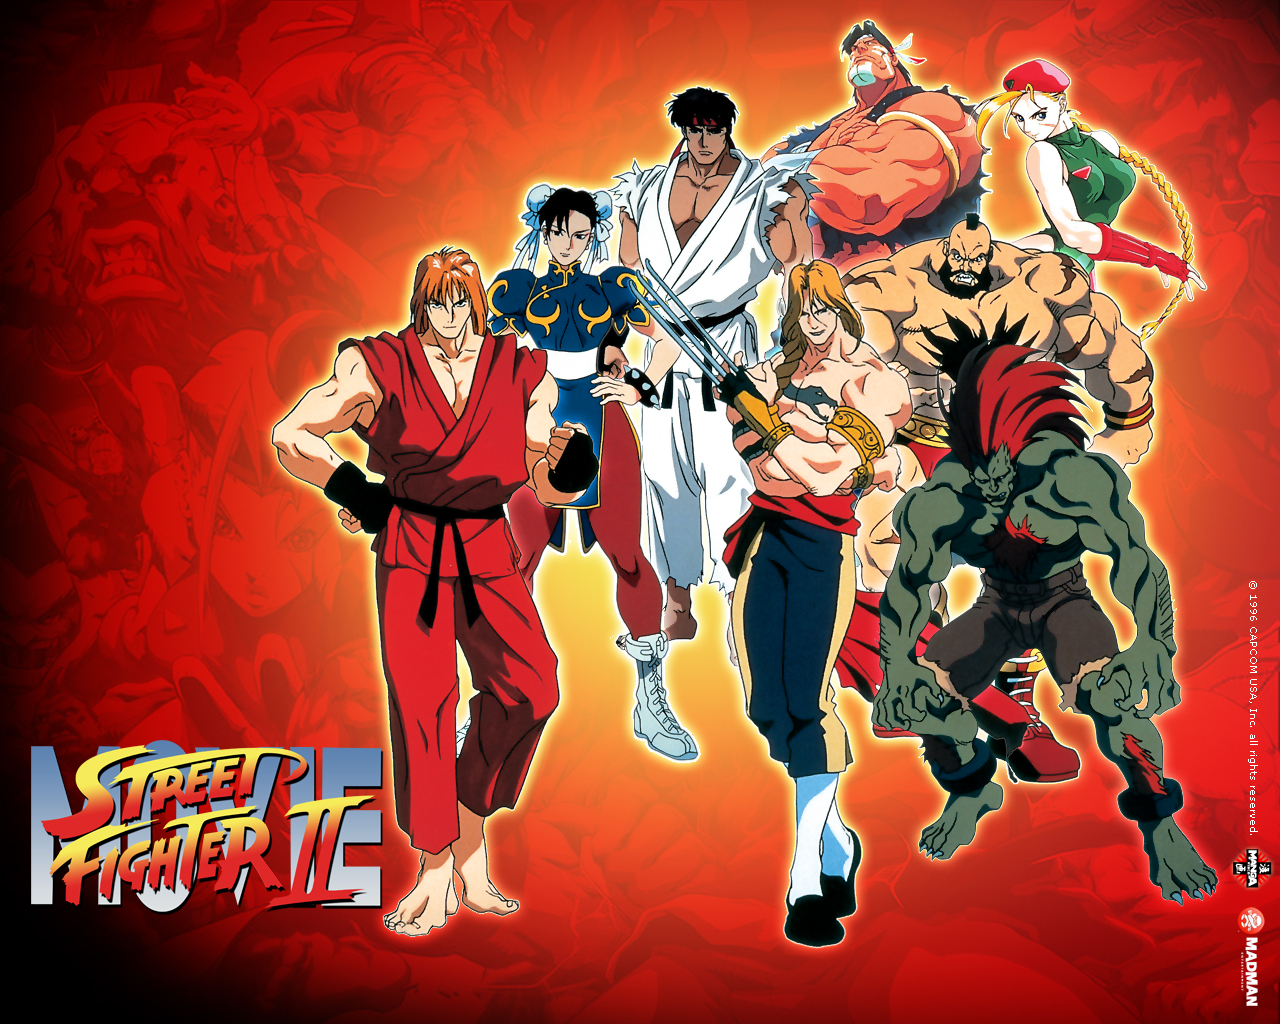 Anime Wallpapers - Streetfighter 2 - The Movie (Uncut)